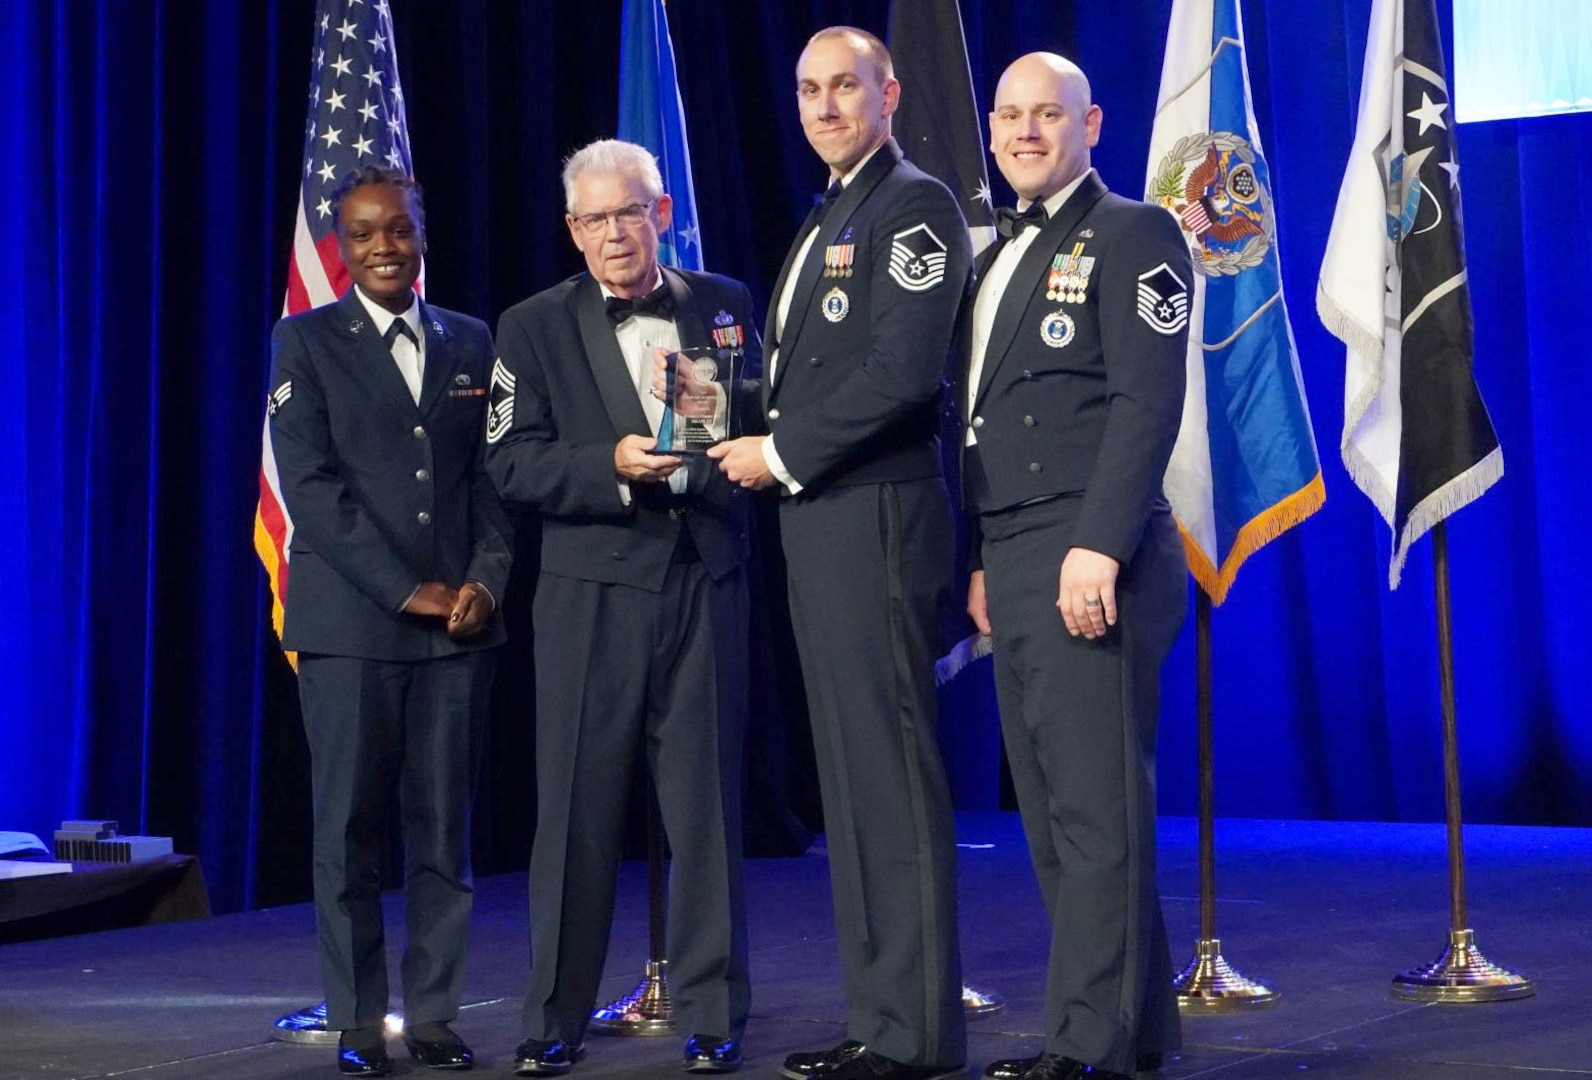 Master Sgt. James Zwiebel, of the 348th Recruiting Squadron officer accessions flight, receives the Air Force Sergeants Association’s Award of Excellence at the at association’s Professional Education and Development Symposium July 2021 in Orlando, Florida.